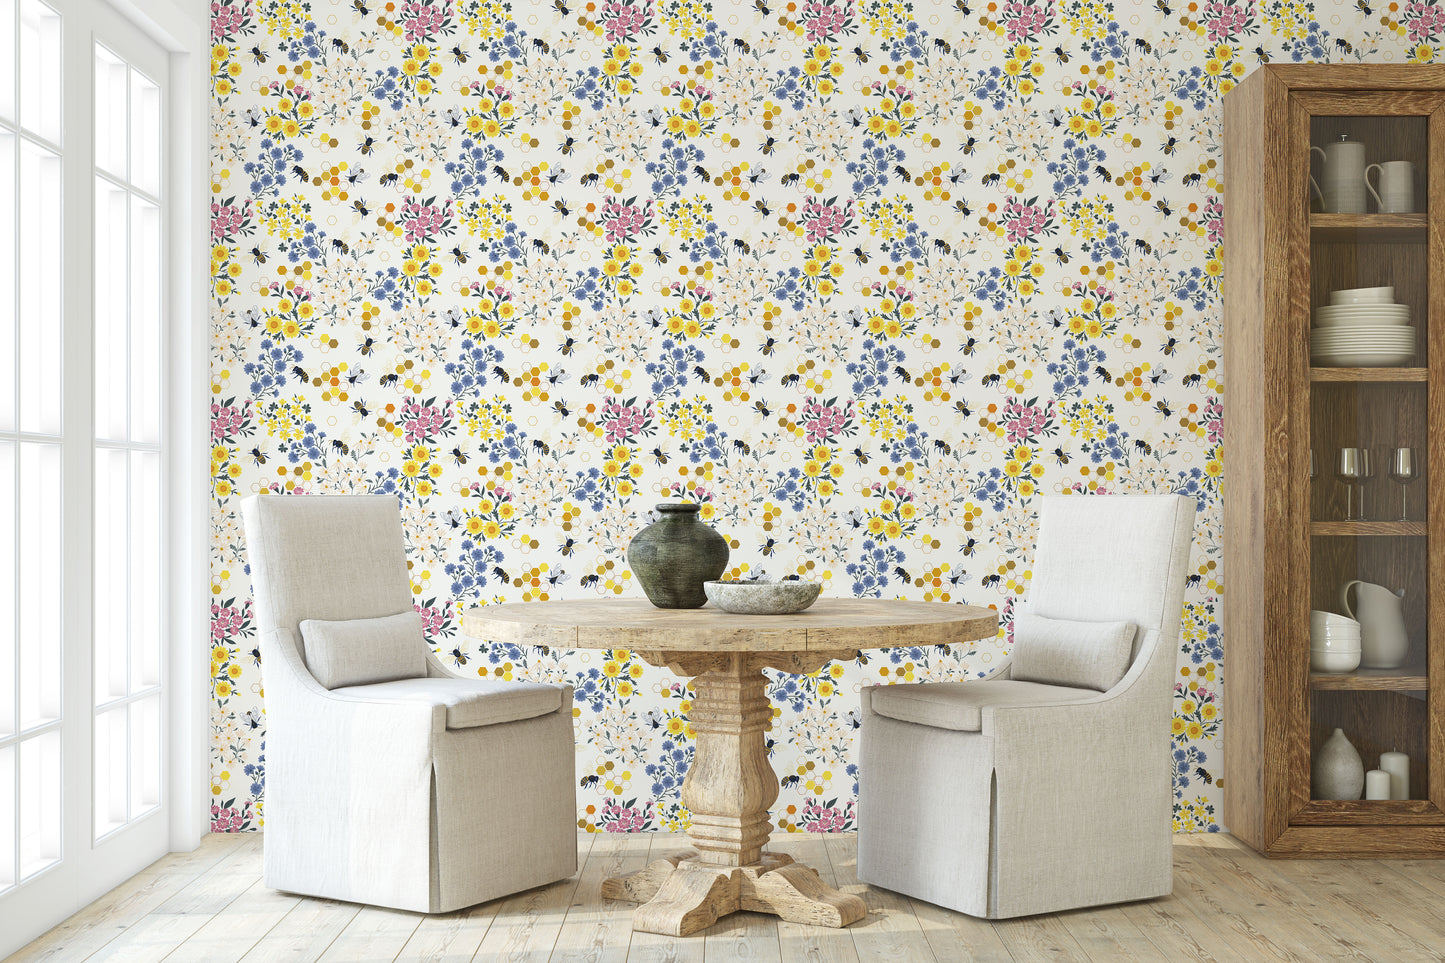 Honey Meadow floral honeycomb and honey bee pattern on white background easy to install and remove peel and stick custom wallpaper available in different lengths/sizes locally created and printed in Canada Artichoke wallpaper. Washable, durable, commercial grade, removable and waterproof.